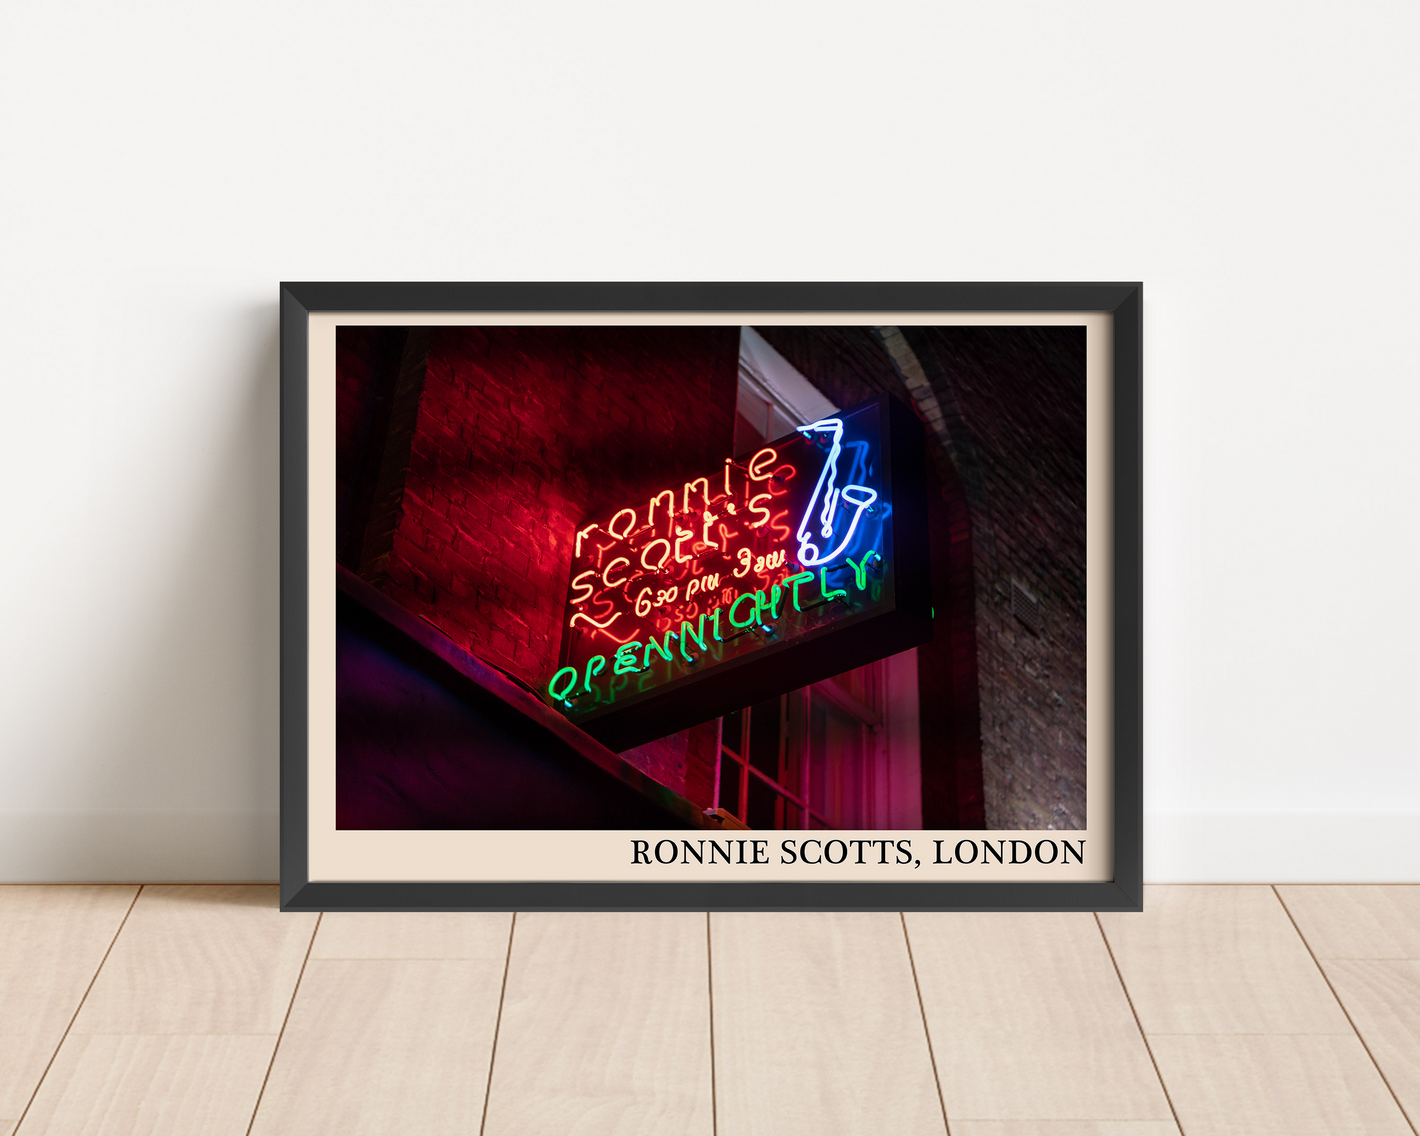 Iconic photo of Ronnie Scotts jazz club in London. Picture crafted into a black framed poster, with an off-white border. Poster is propped against a white wall